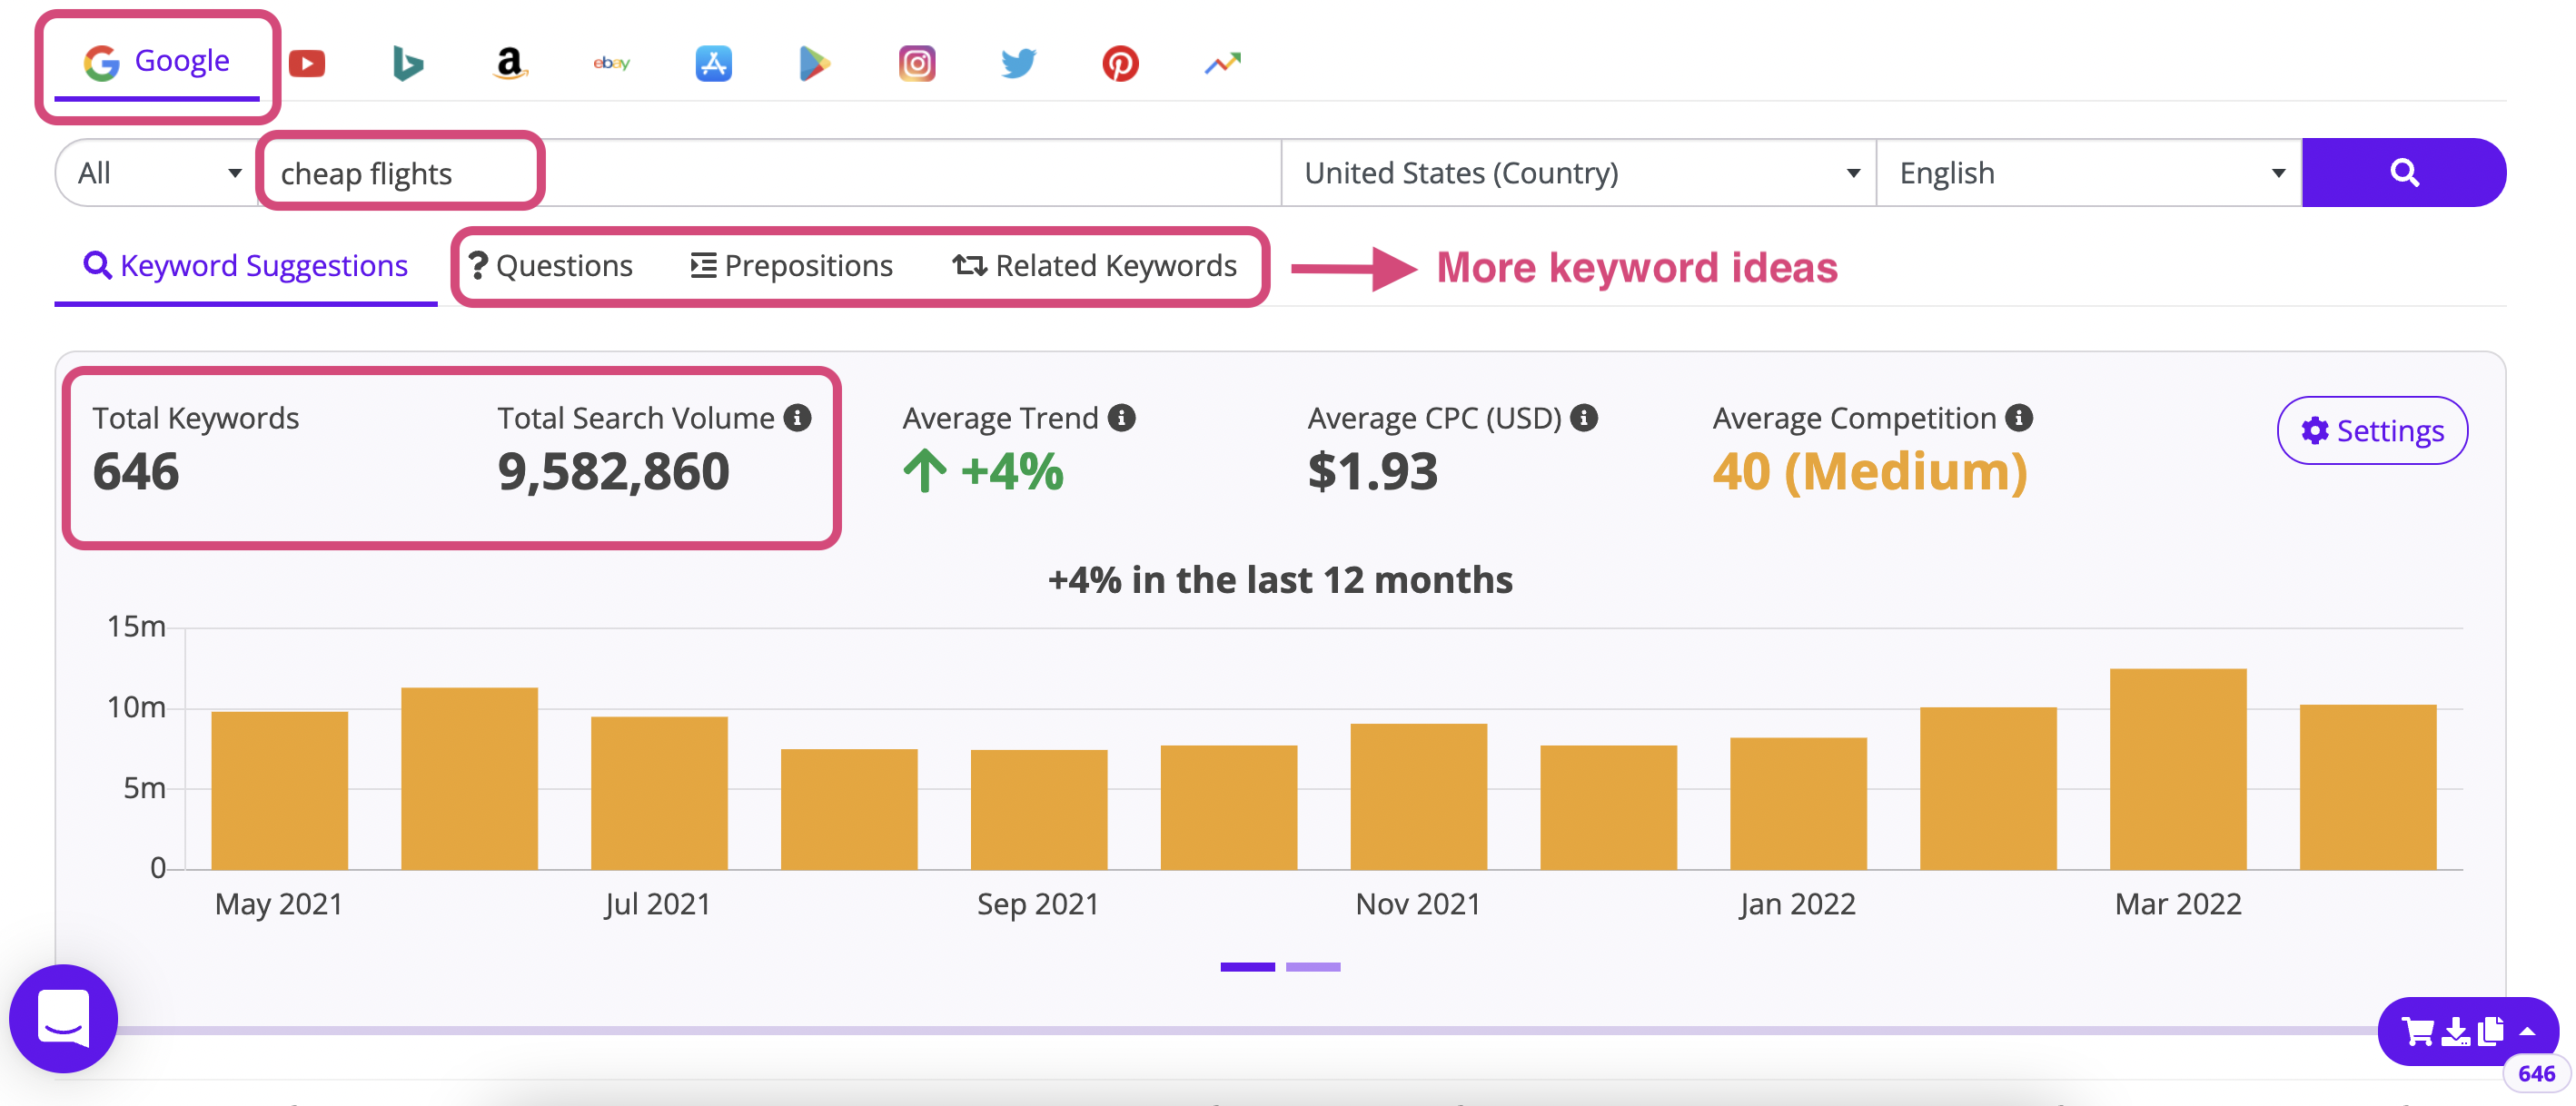 Keyword Tool gives similar results to Google Autocomplete, yet with more keyword and crucial information